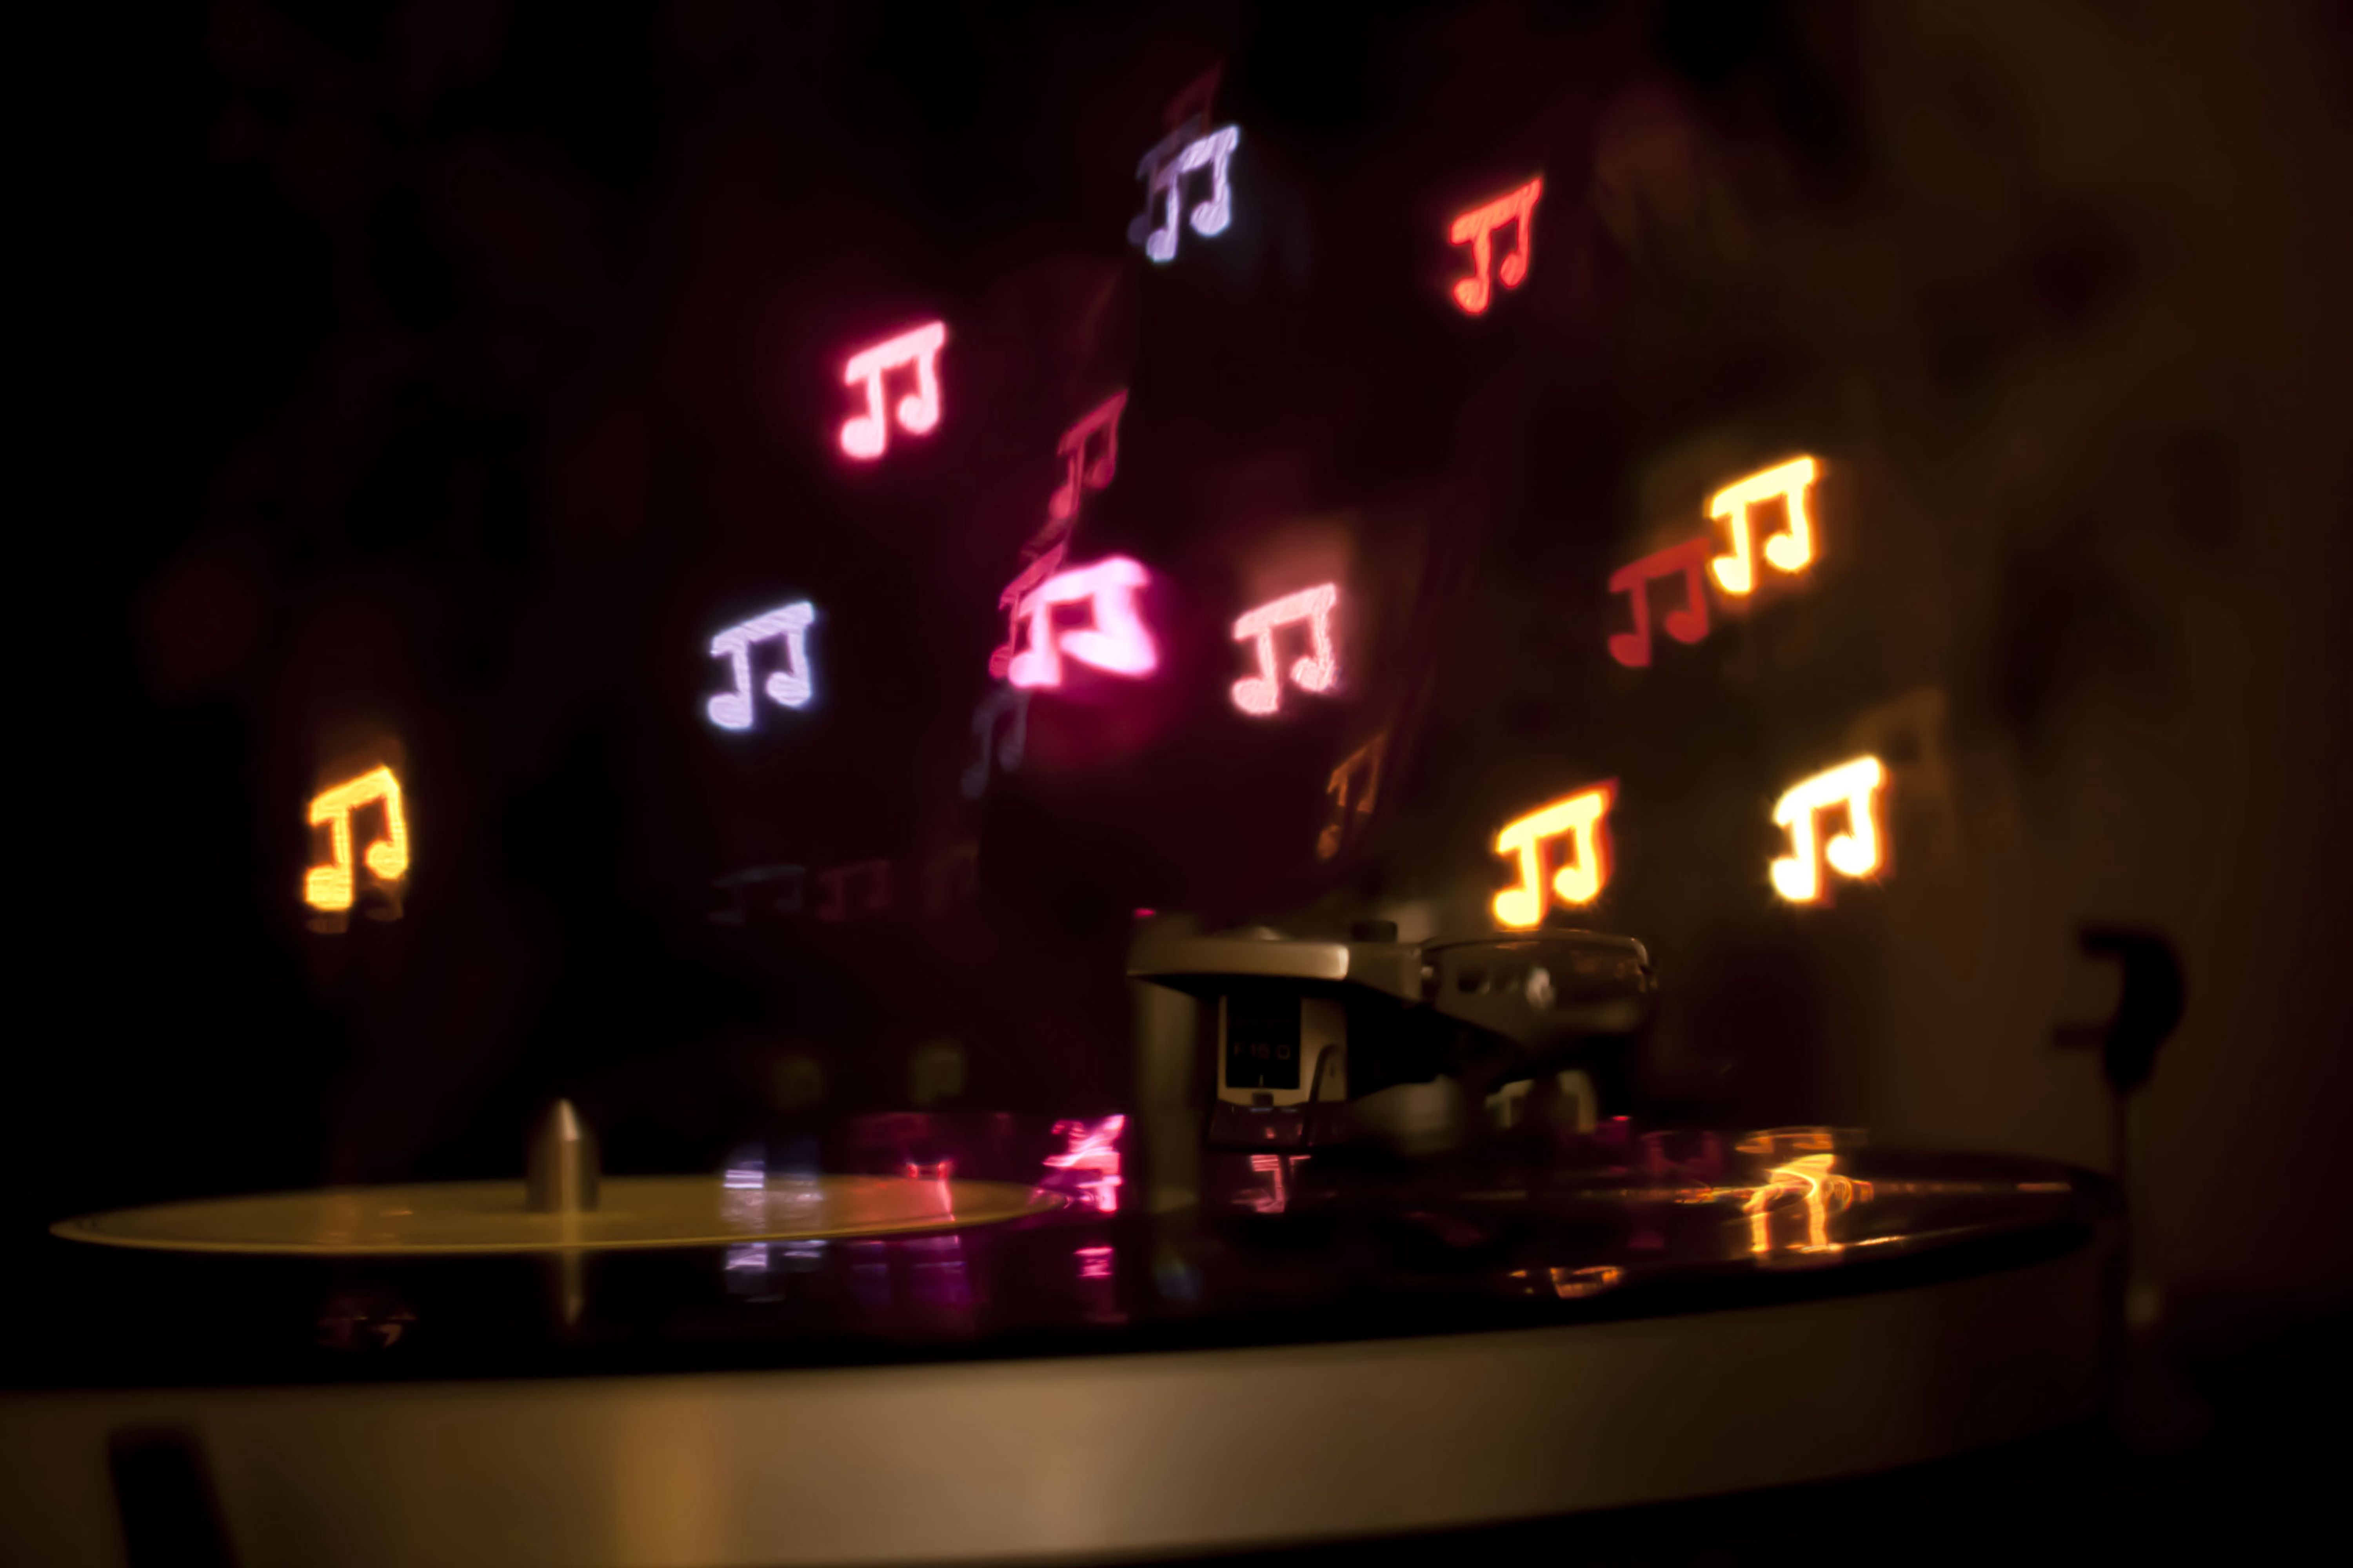 music, notes, needle, lights, glow, plate, vinyl, turntable, record player